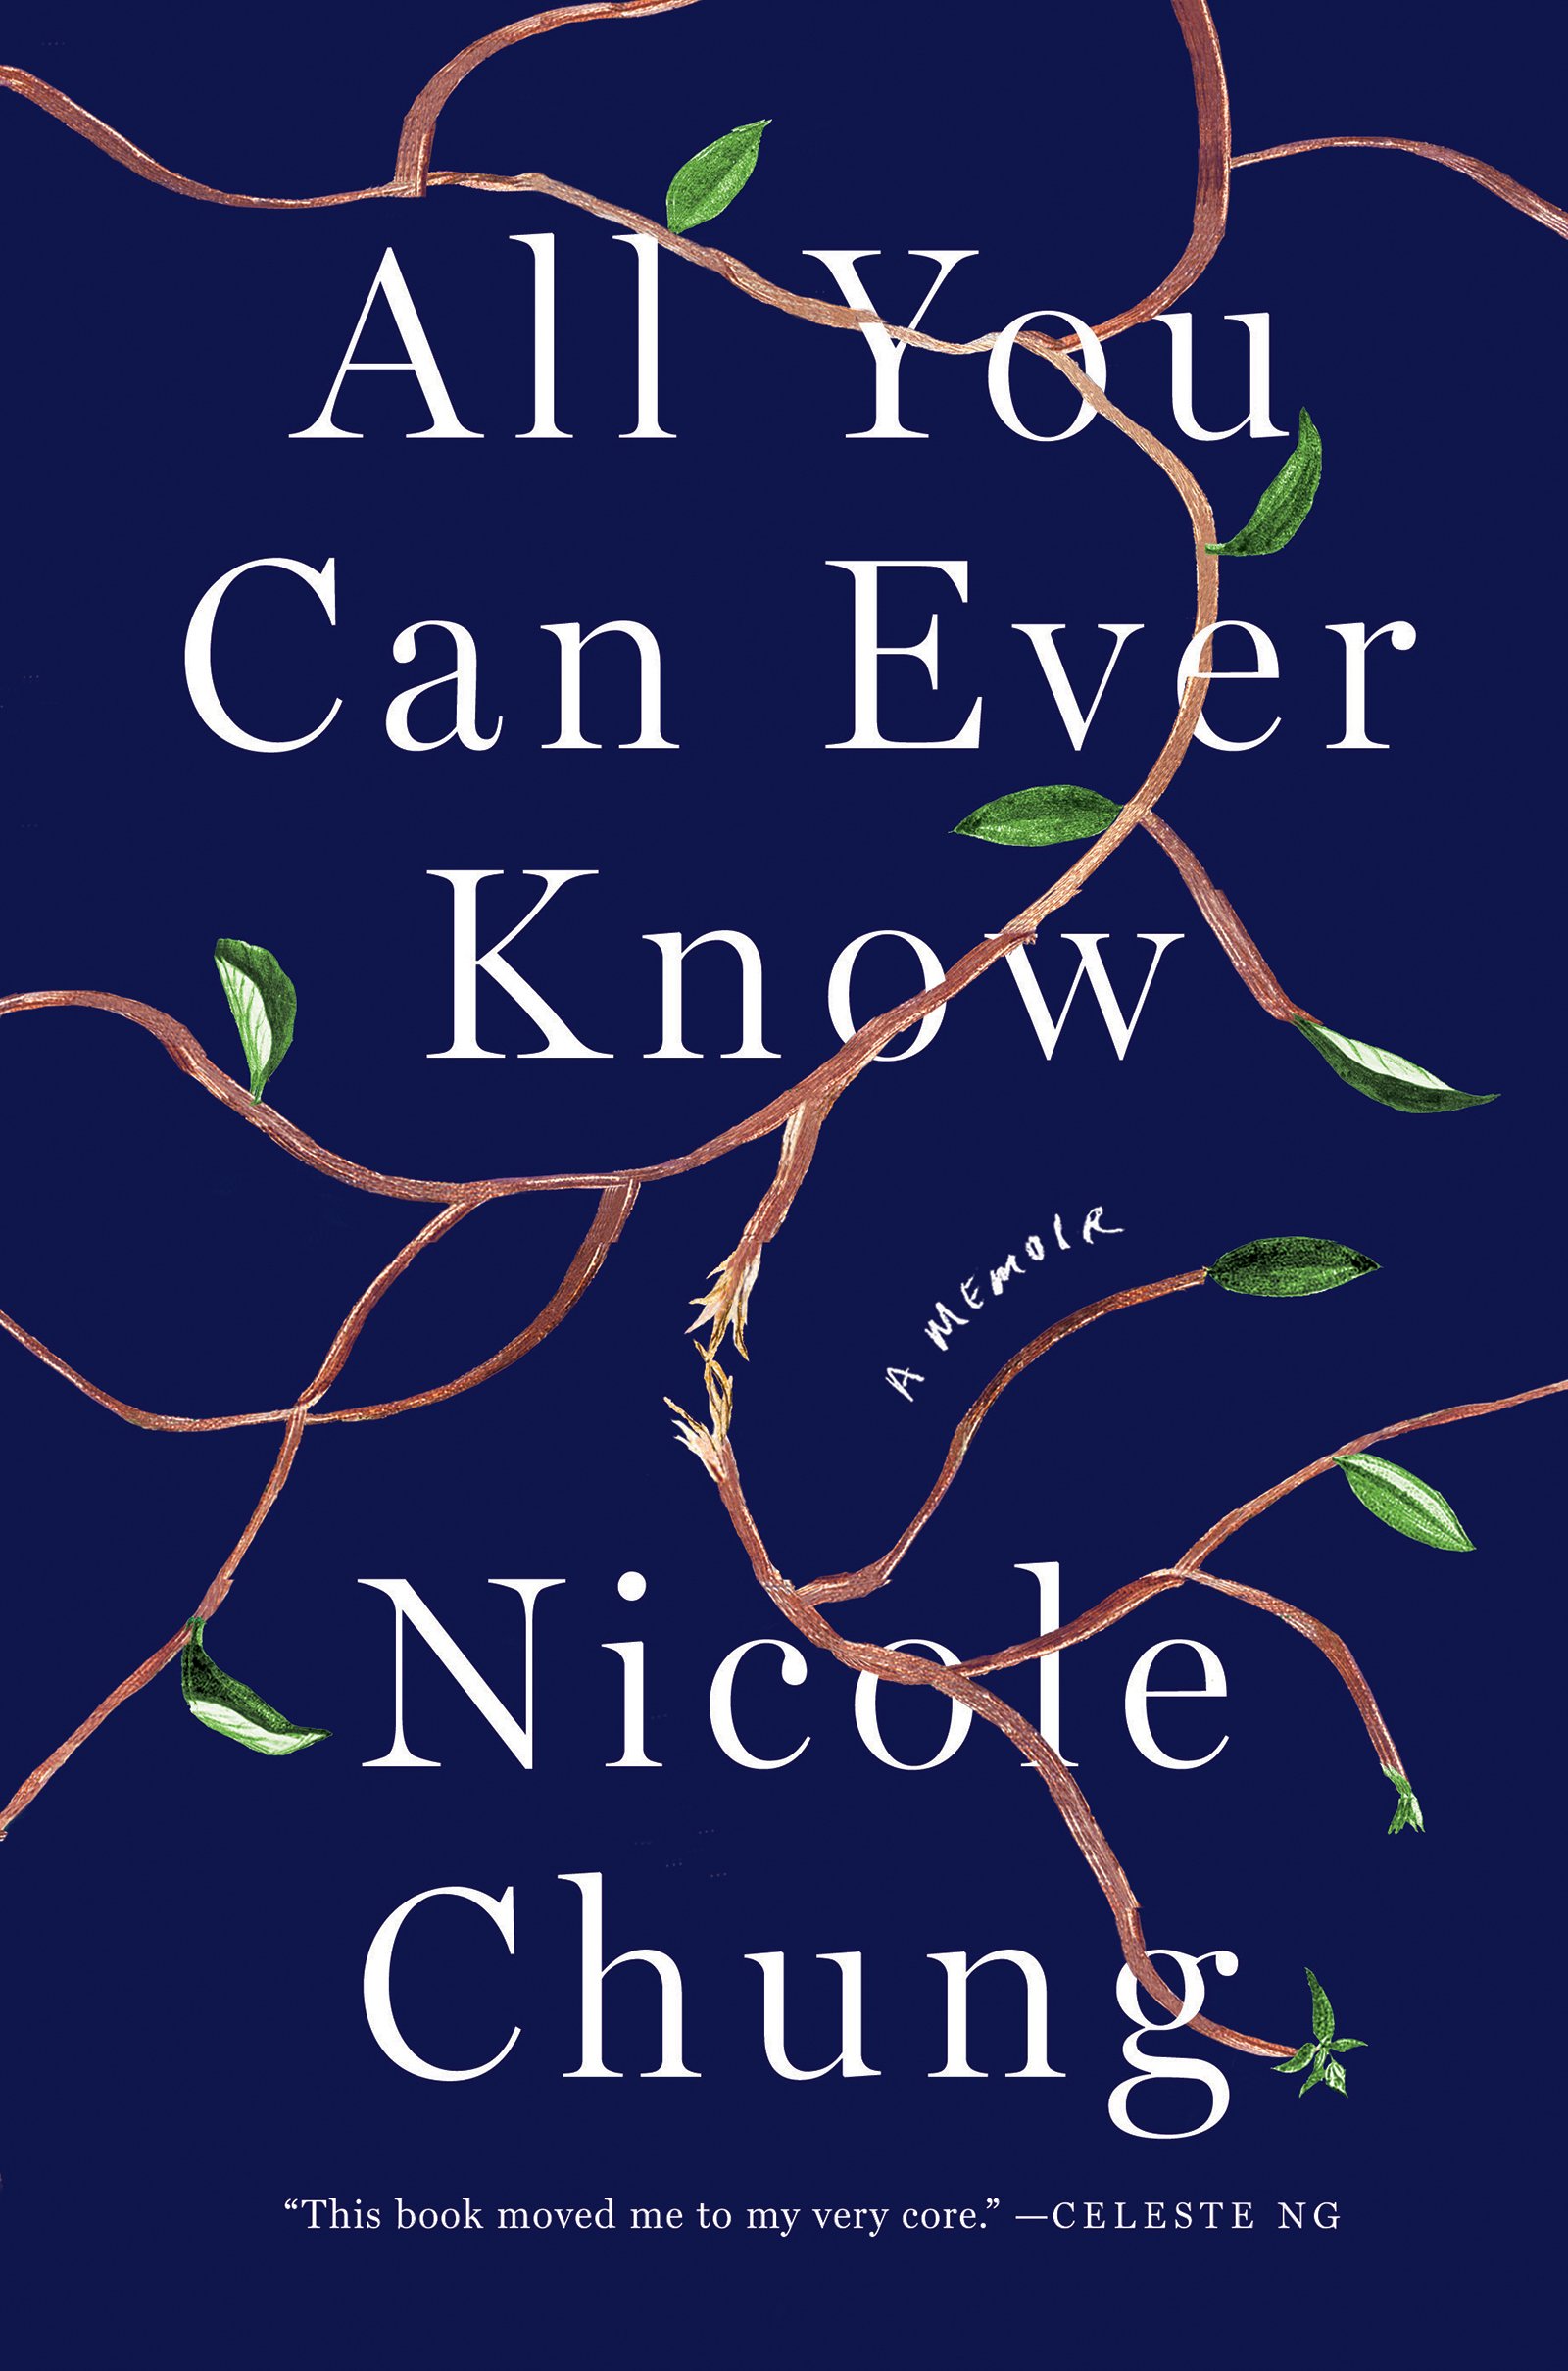 11. 'All You Can Ever Know' by Nicole Chung